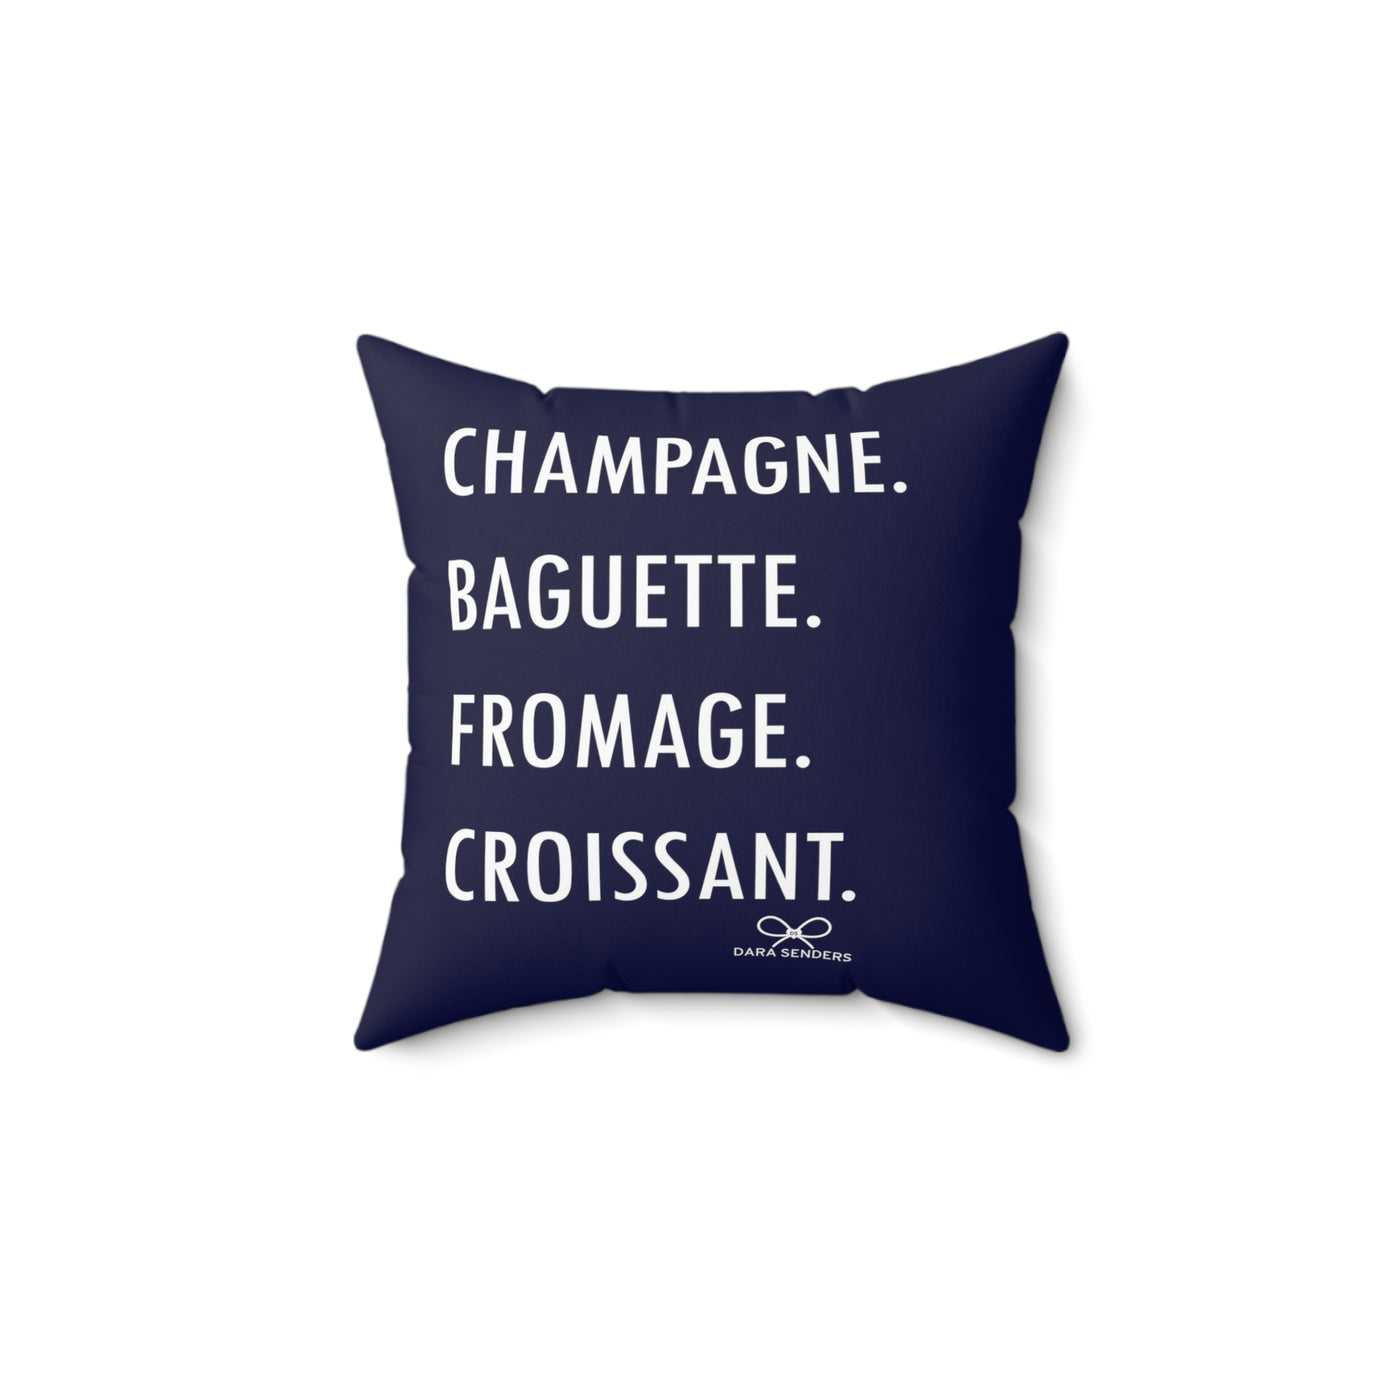 GOURMET LOVE PILLOW Faux Suede (Champagne, Baguette, Fromage, Croissant) - Navy - NEWS 12 EXCLUSIVE